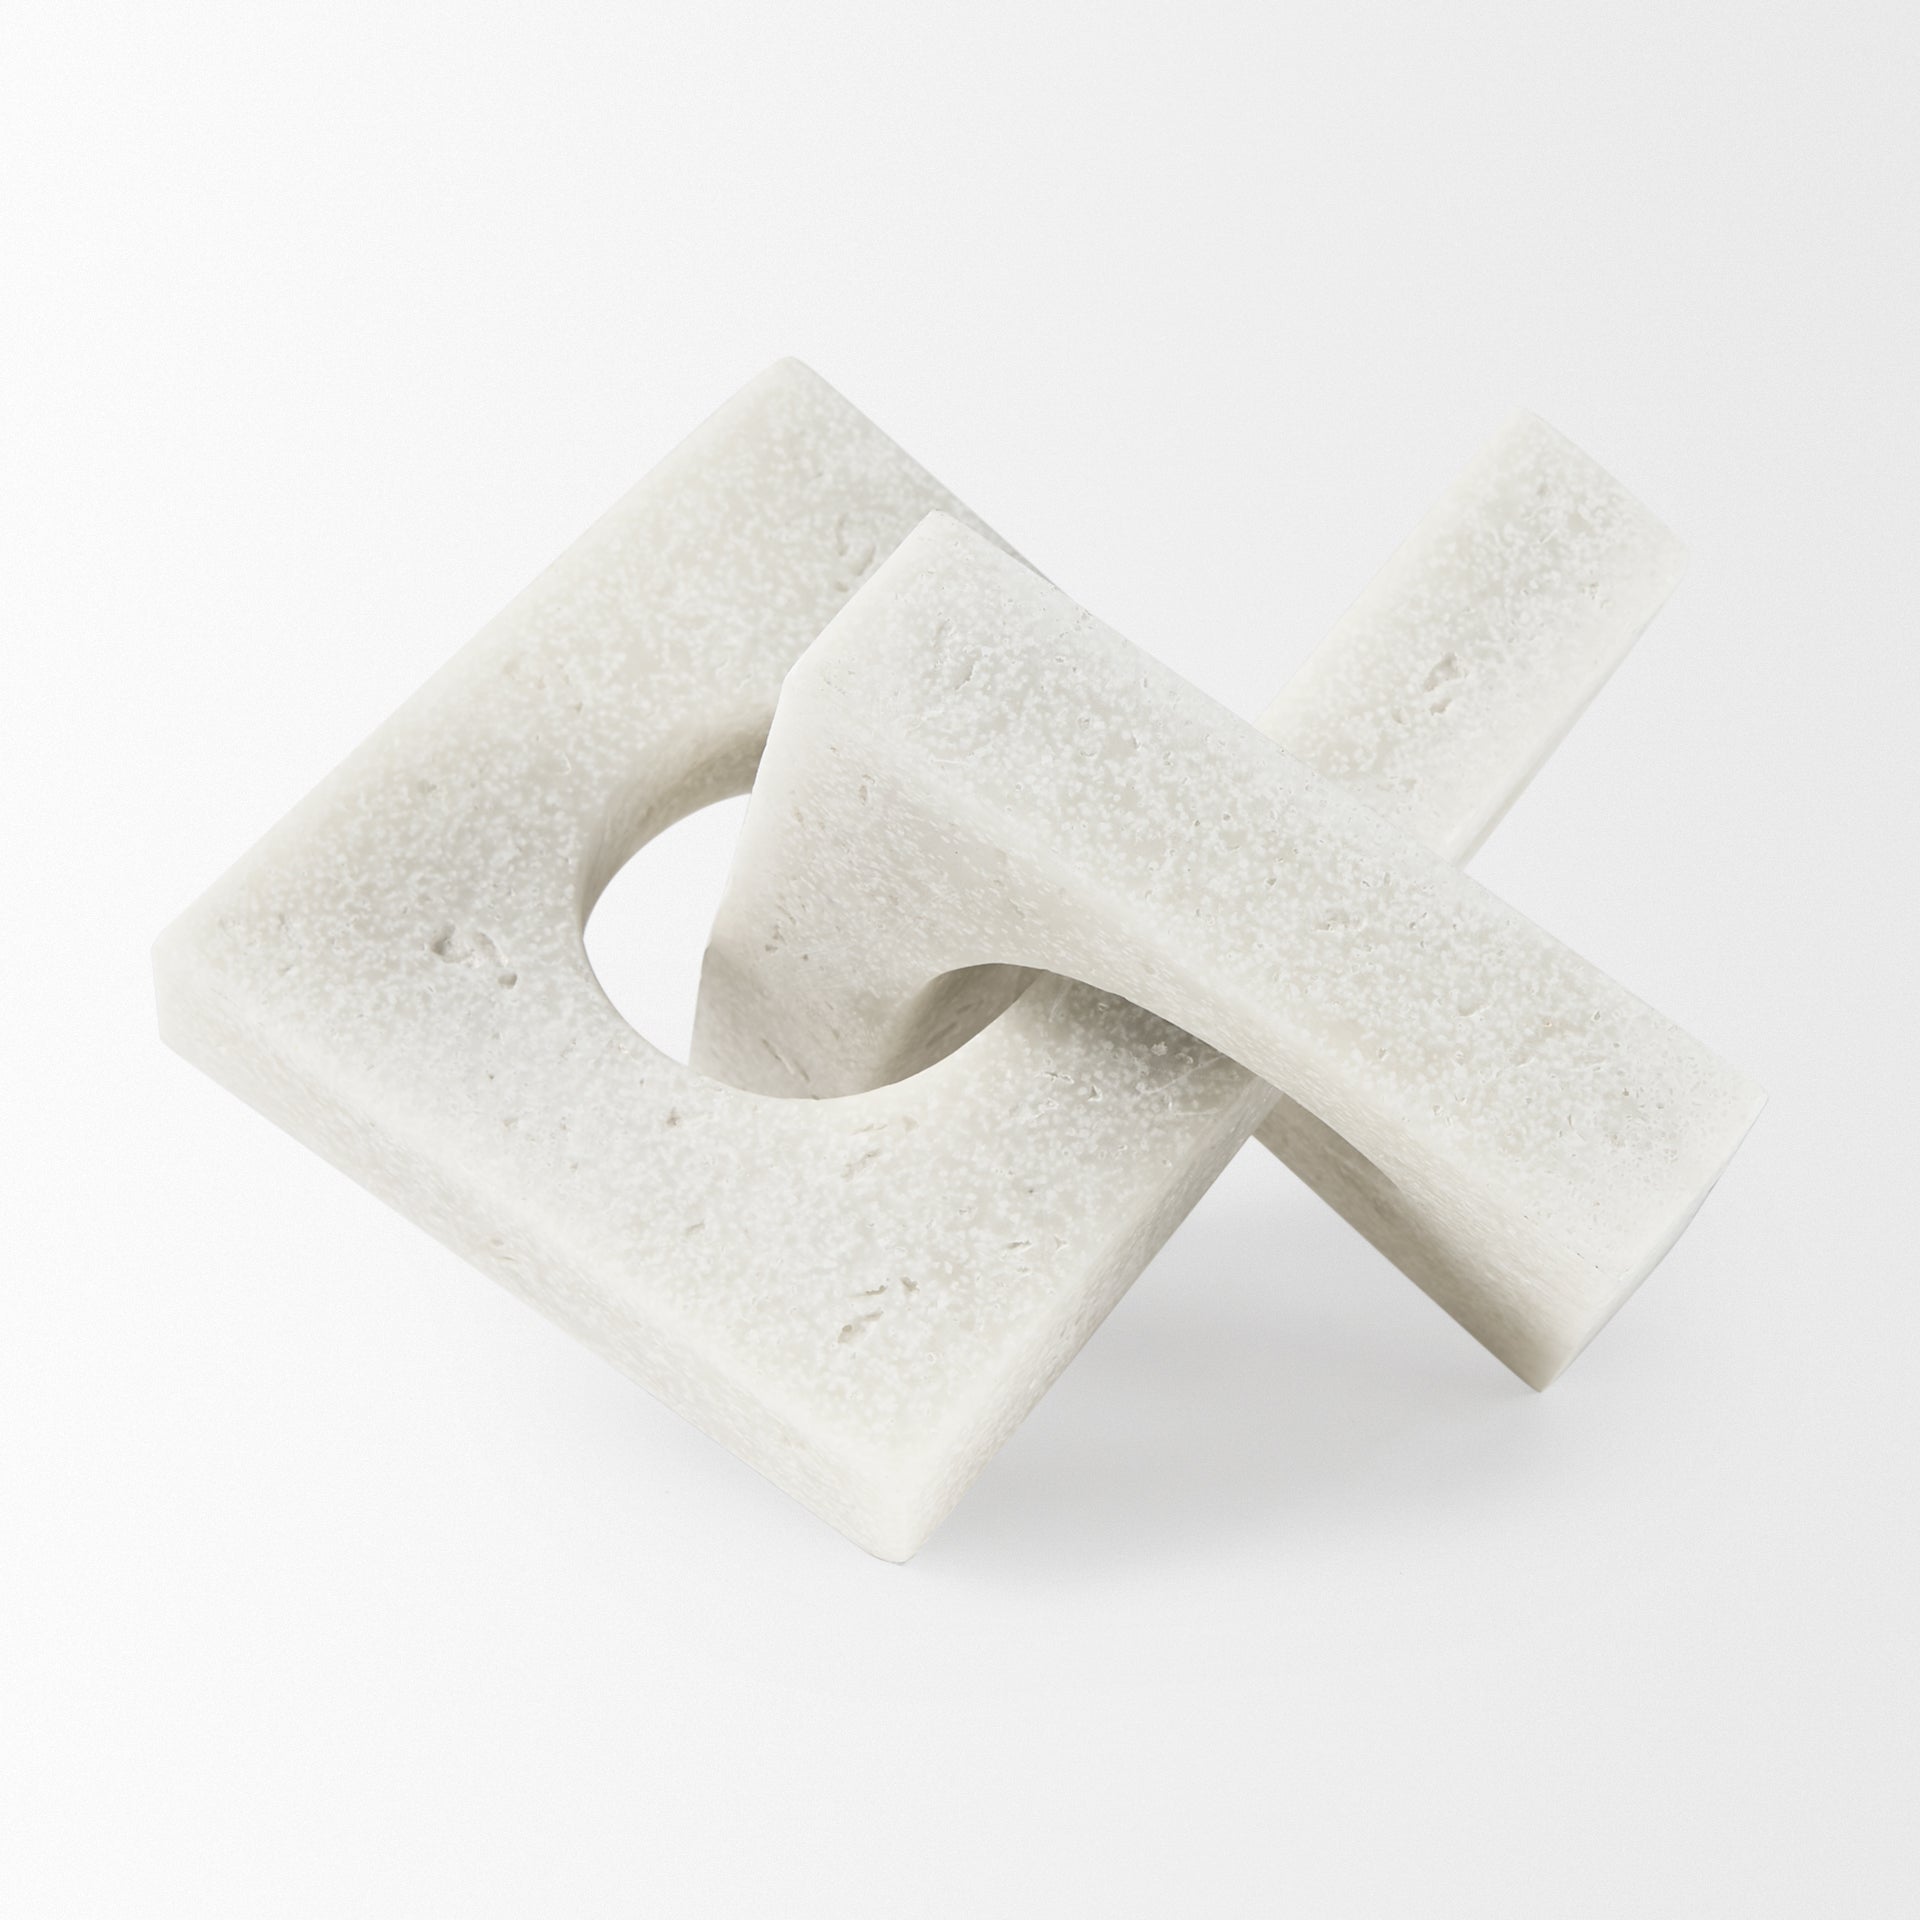 LINX SMALL OBJECT- WHITE RESIN